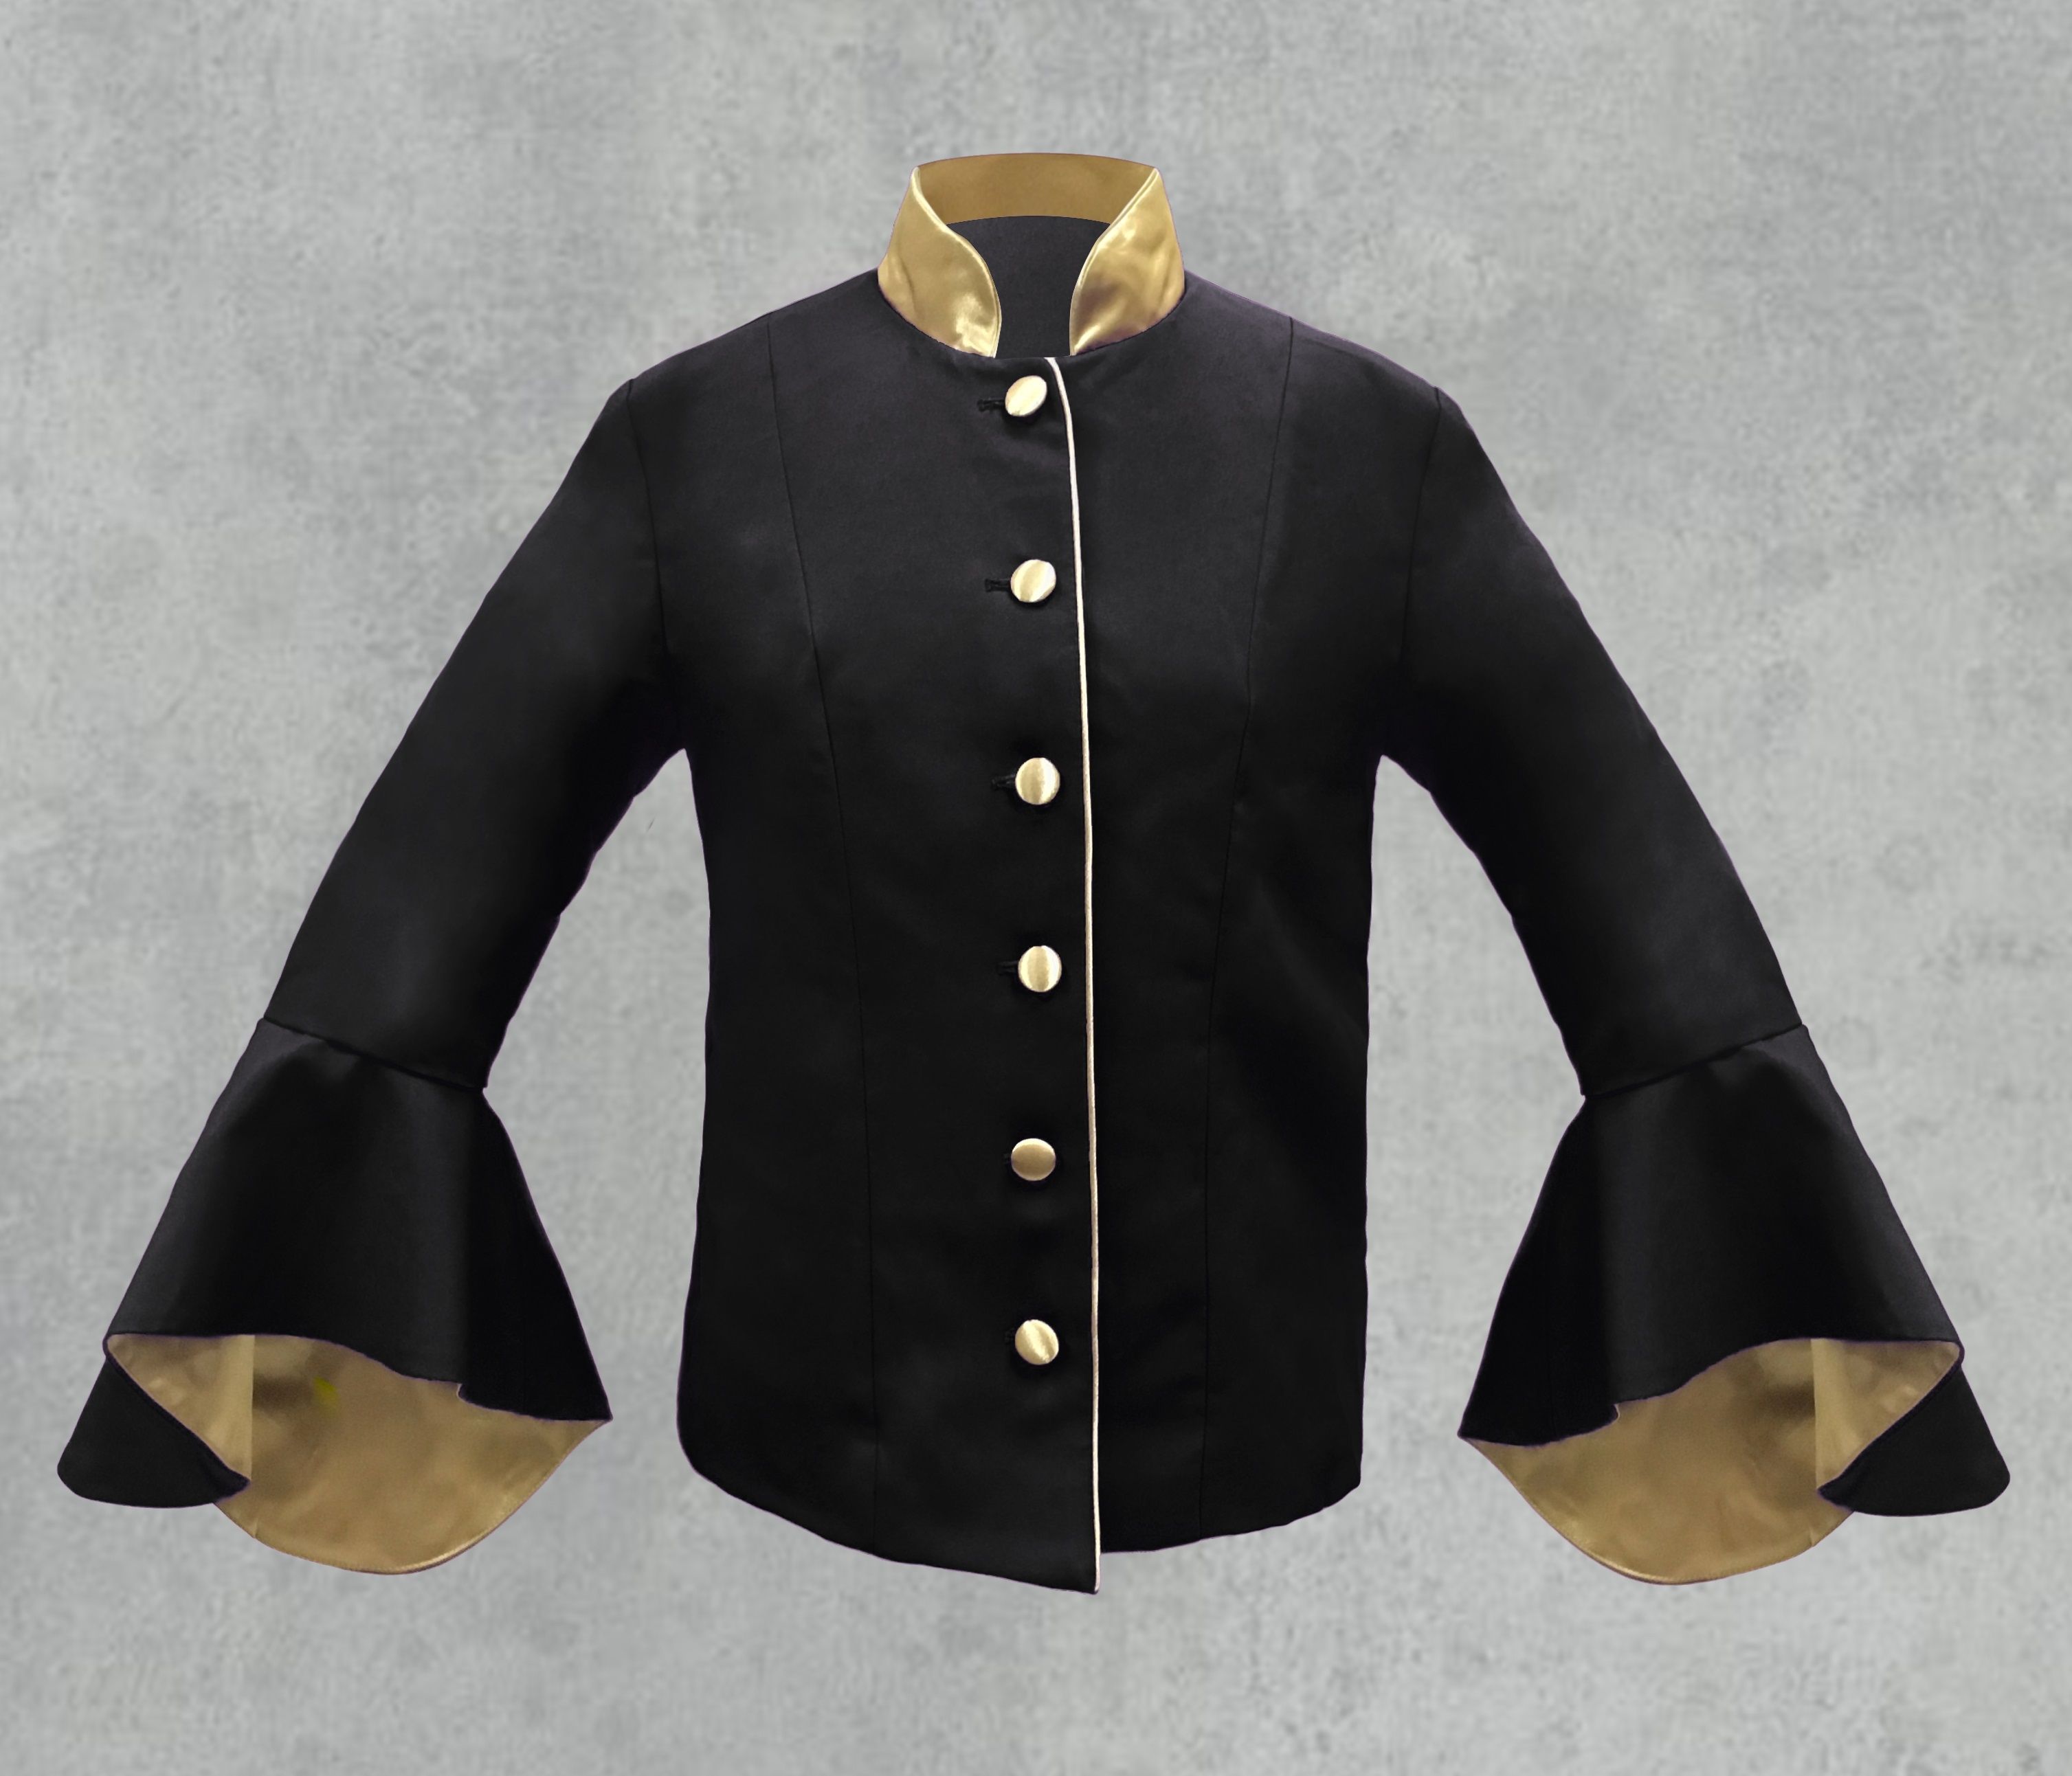 Black and Gold Clergy Jacket for women